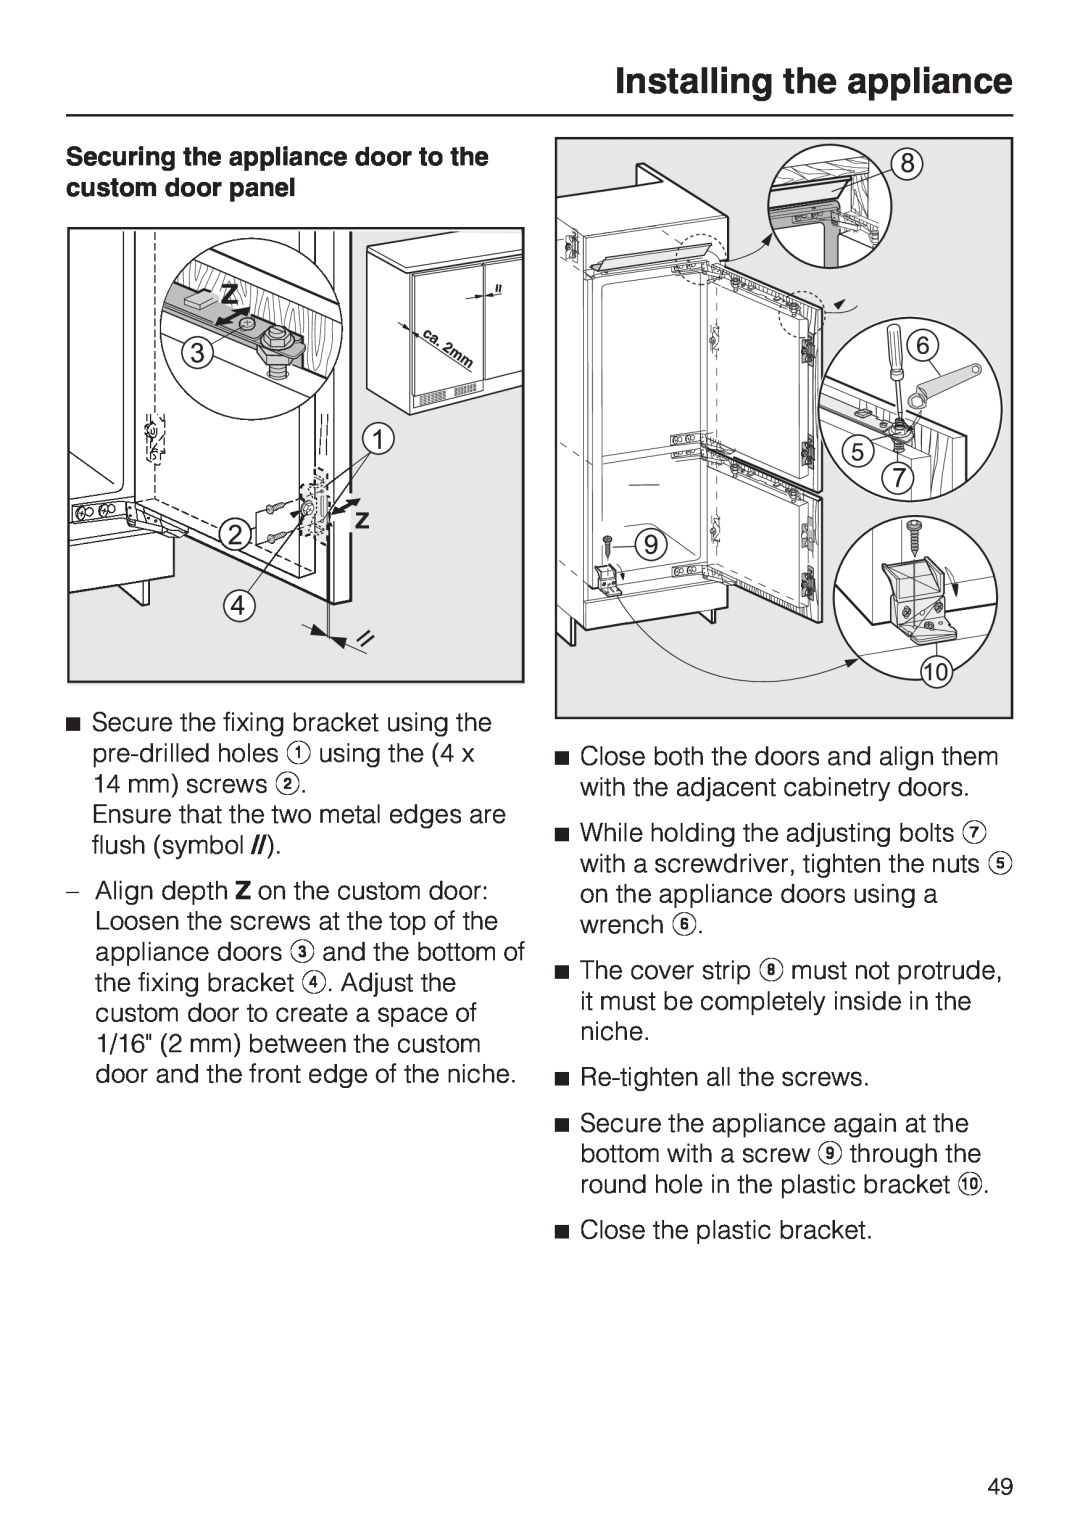 Miele KFN 9753 ID installation instructions Installing the appliance, Ensure that the two metal edges are flush symbol 